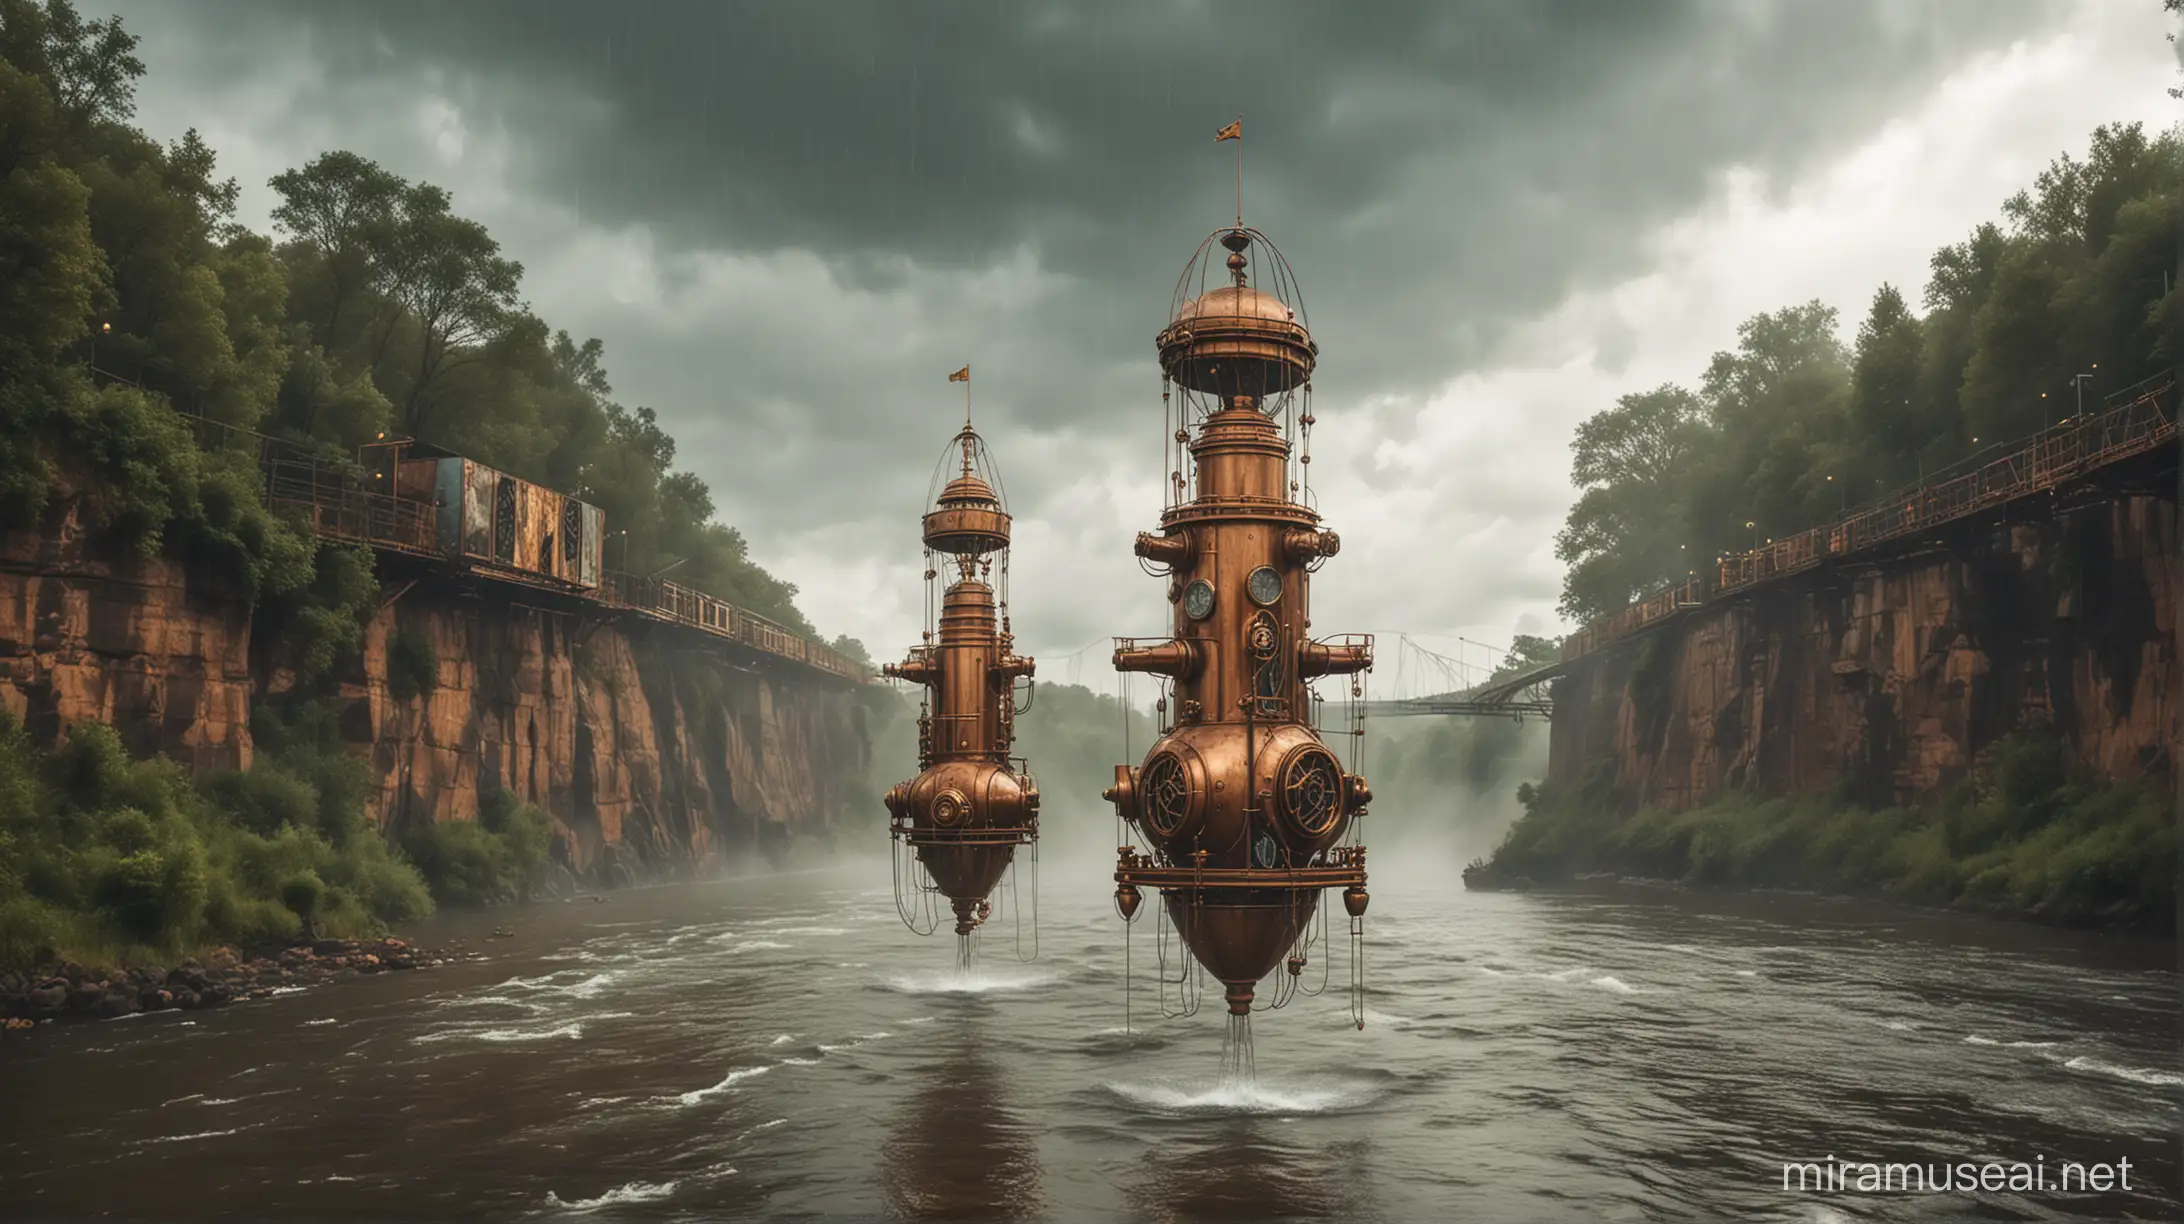 Steampunk Rotodynes Flying Over a Cloudy River